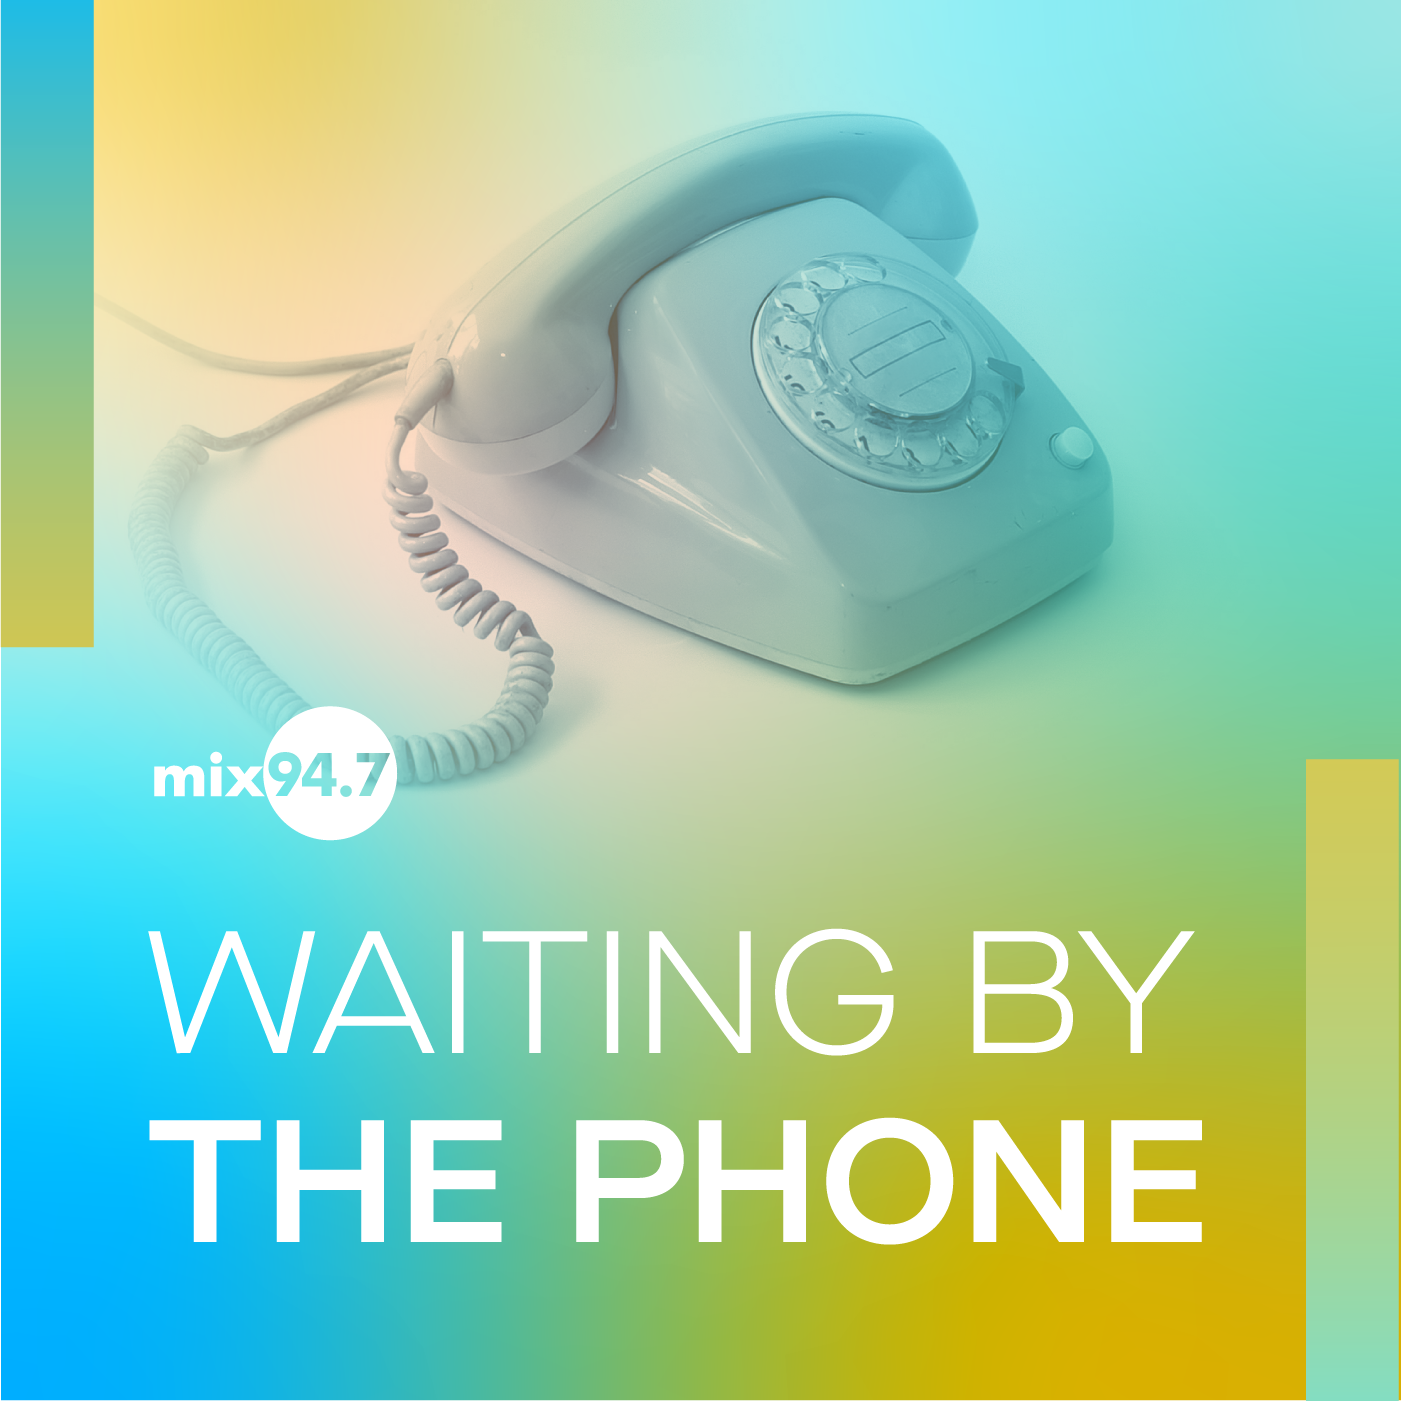 Waiting By The Phone: ENERGY is the keyword here